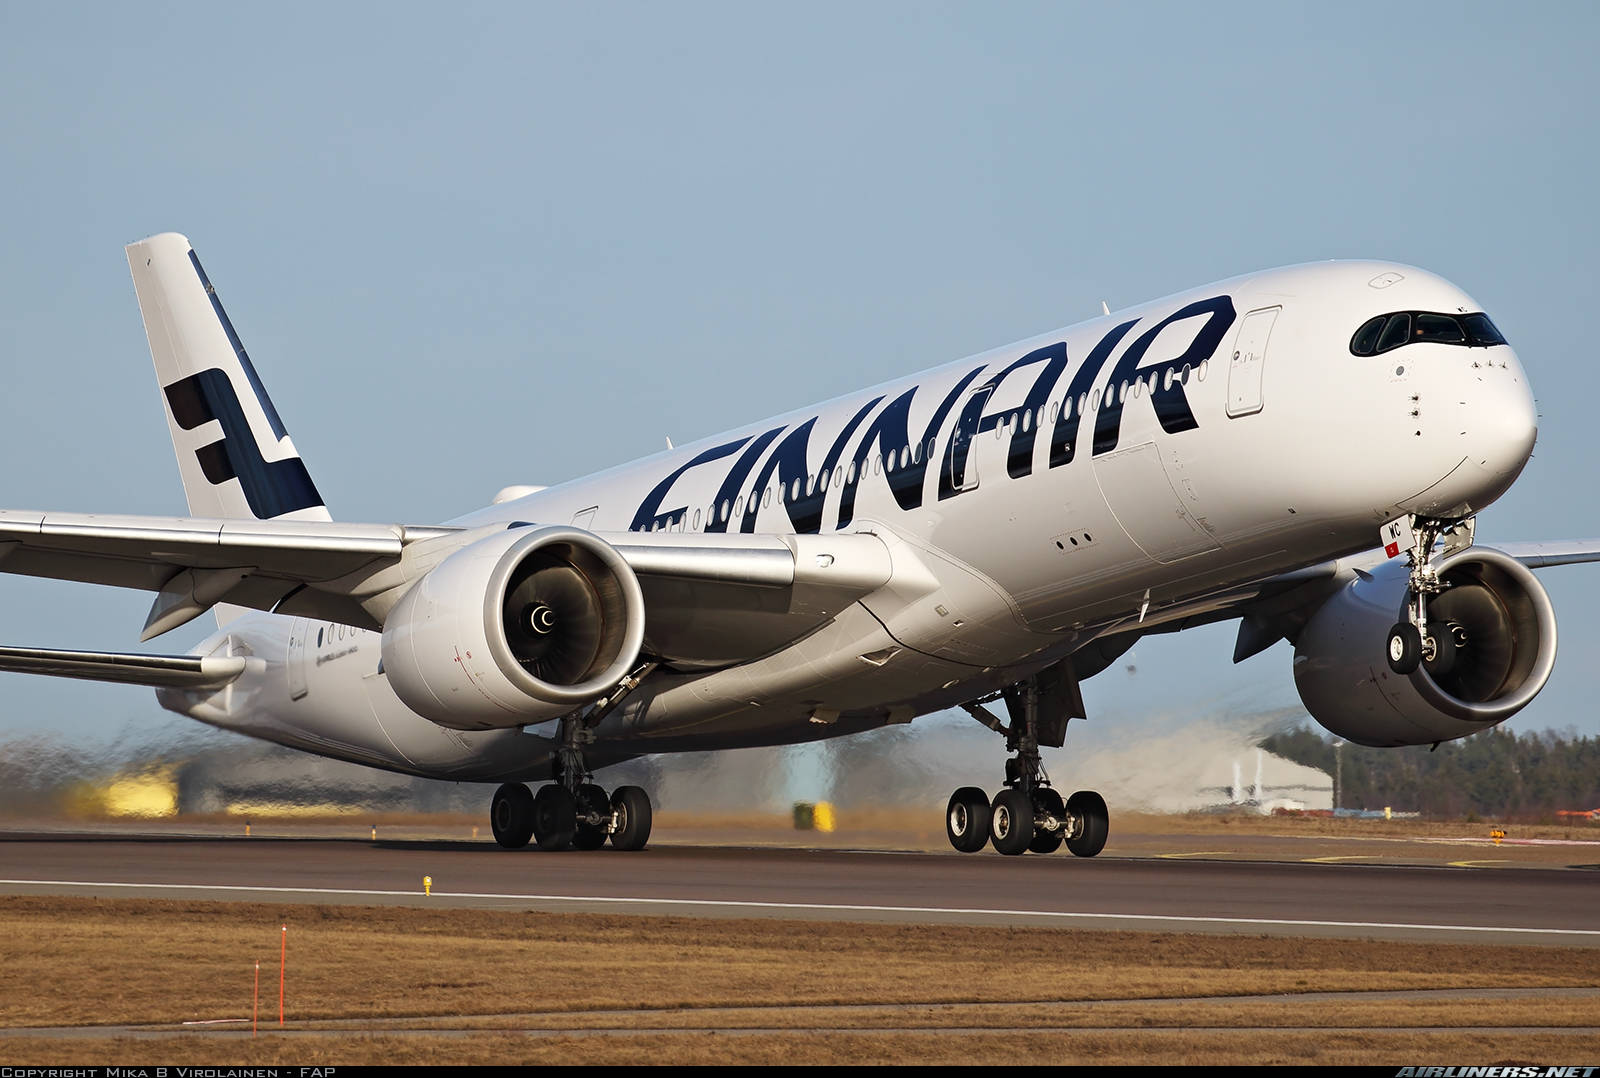 Finnair About To Take Off Wallpaper